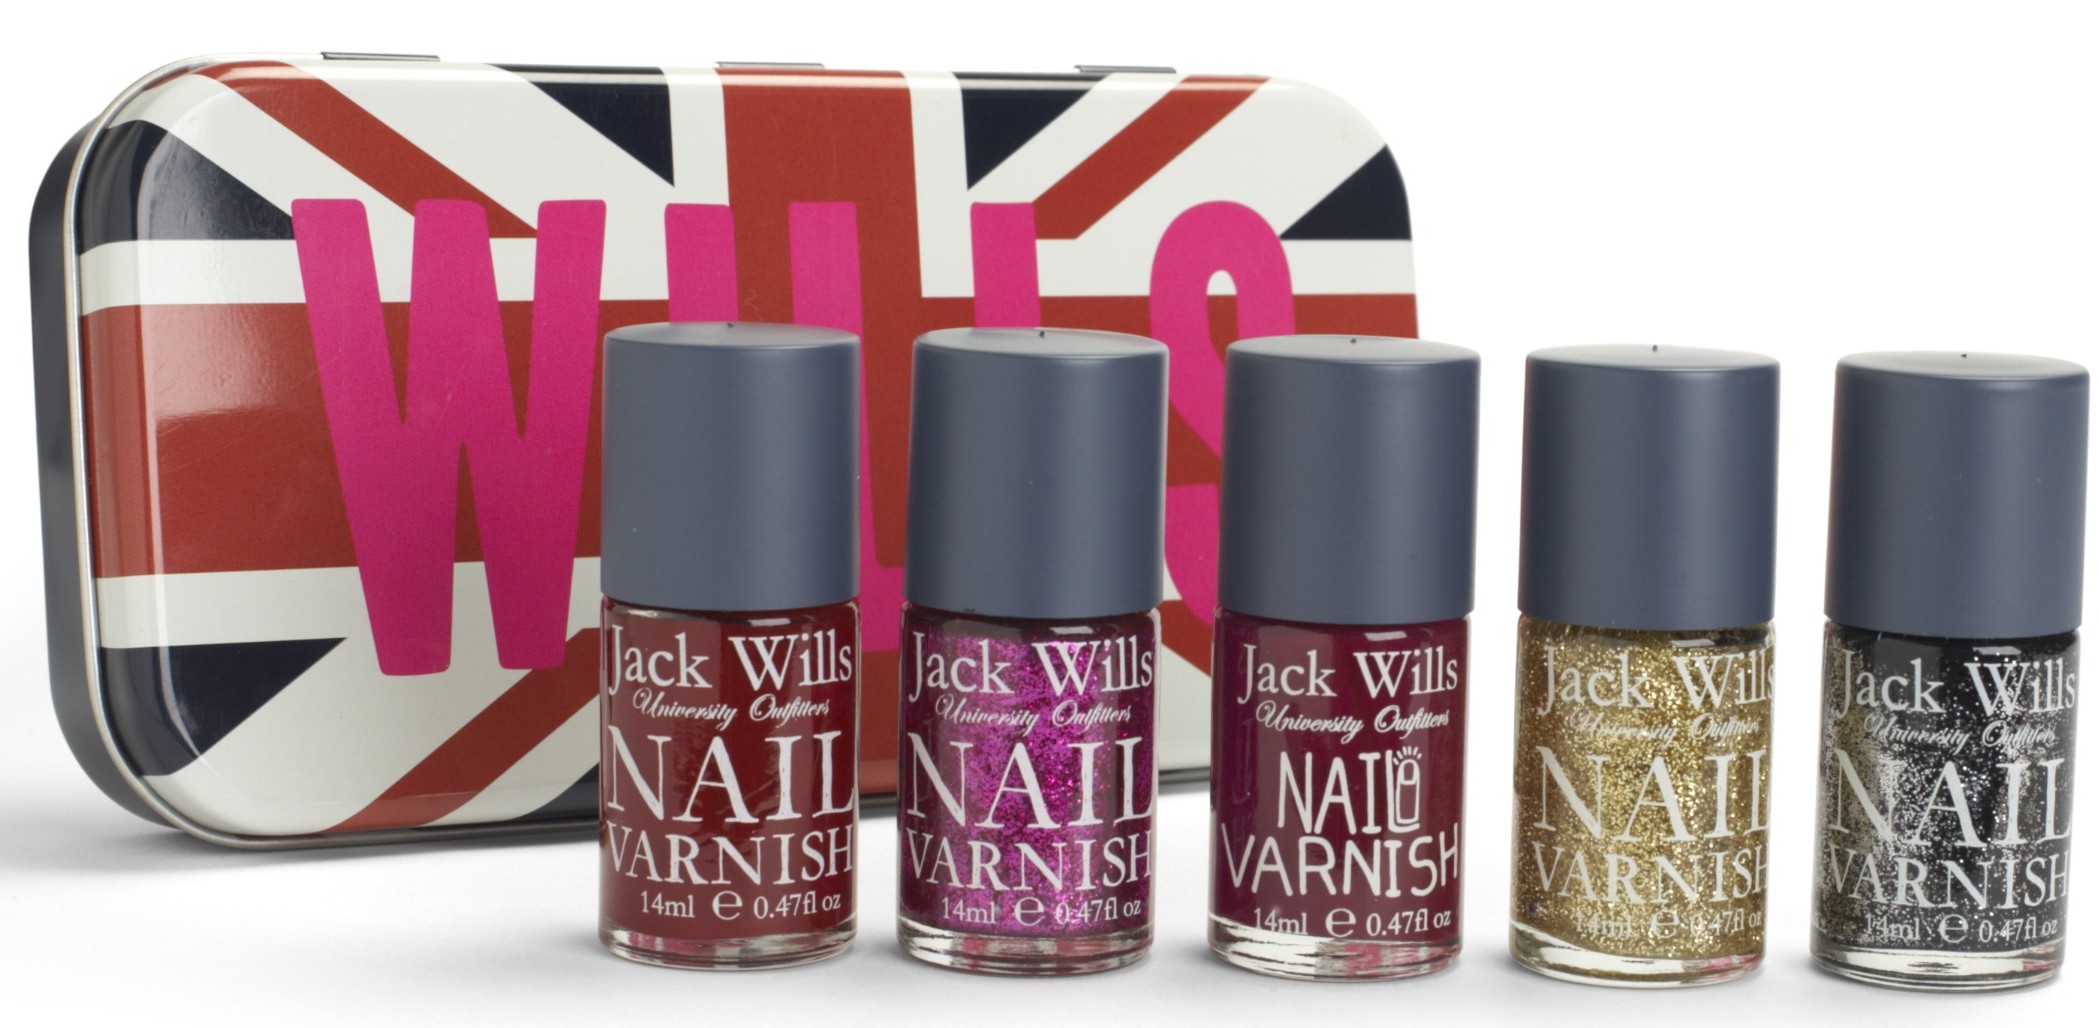 Jack Wills is opening in Hong Kong… and it's Fabulously British!